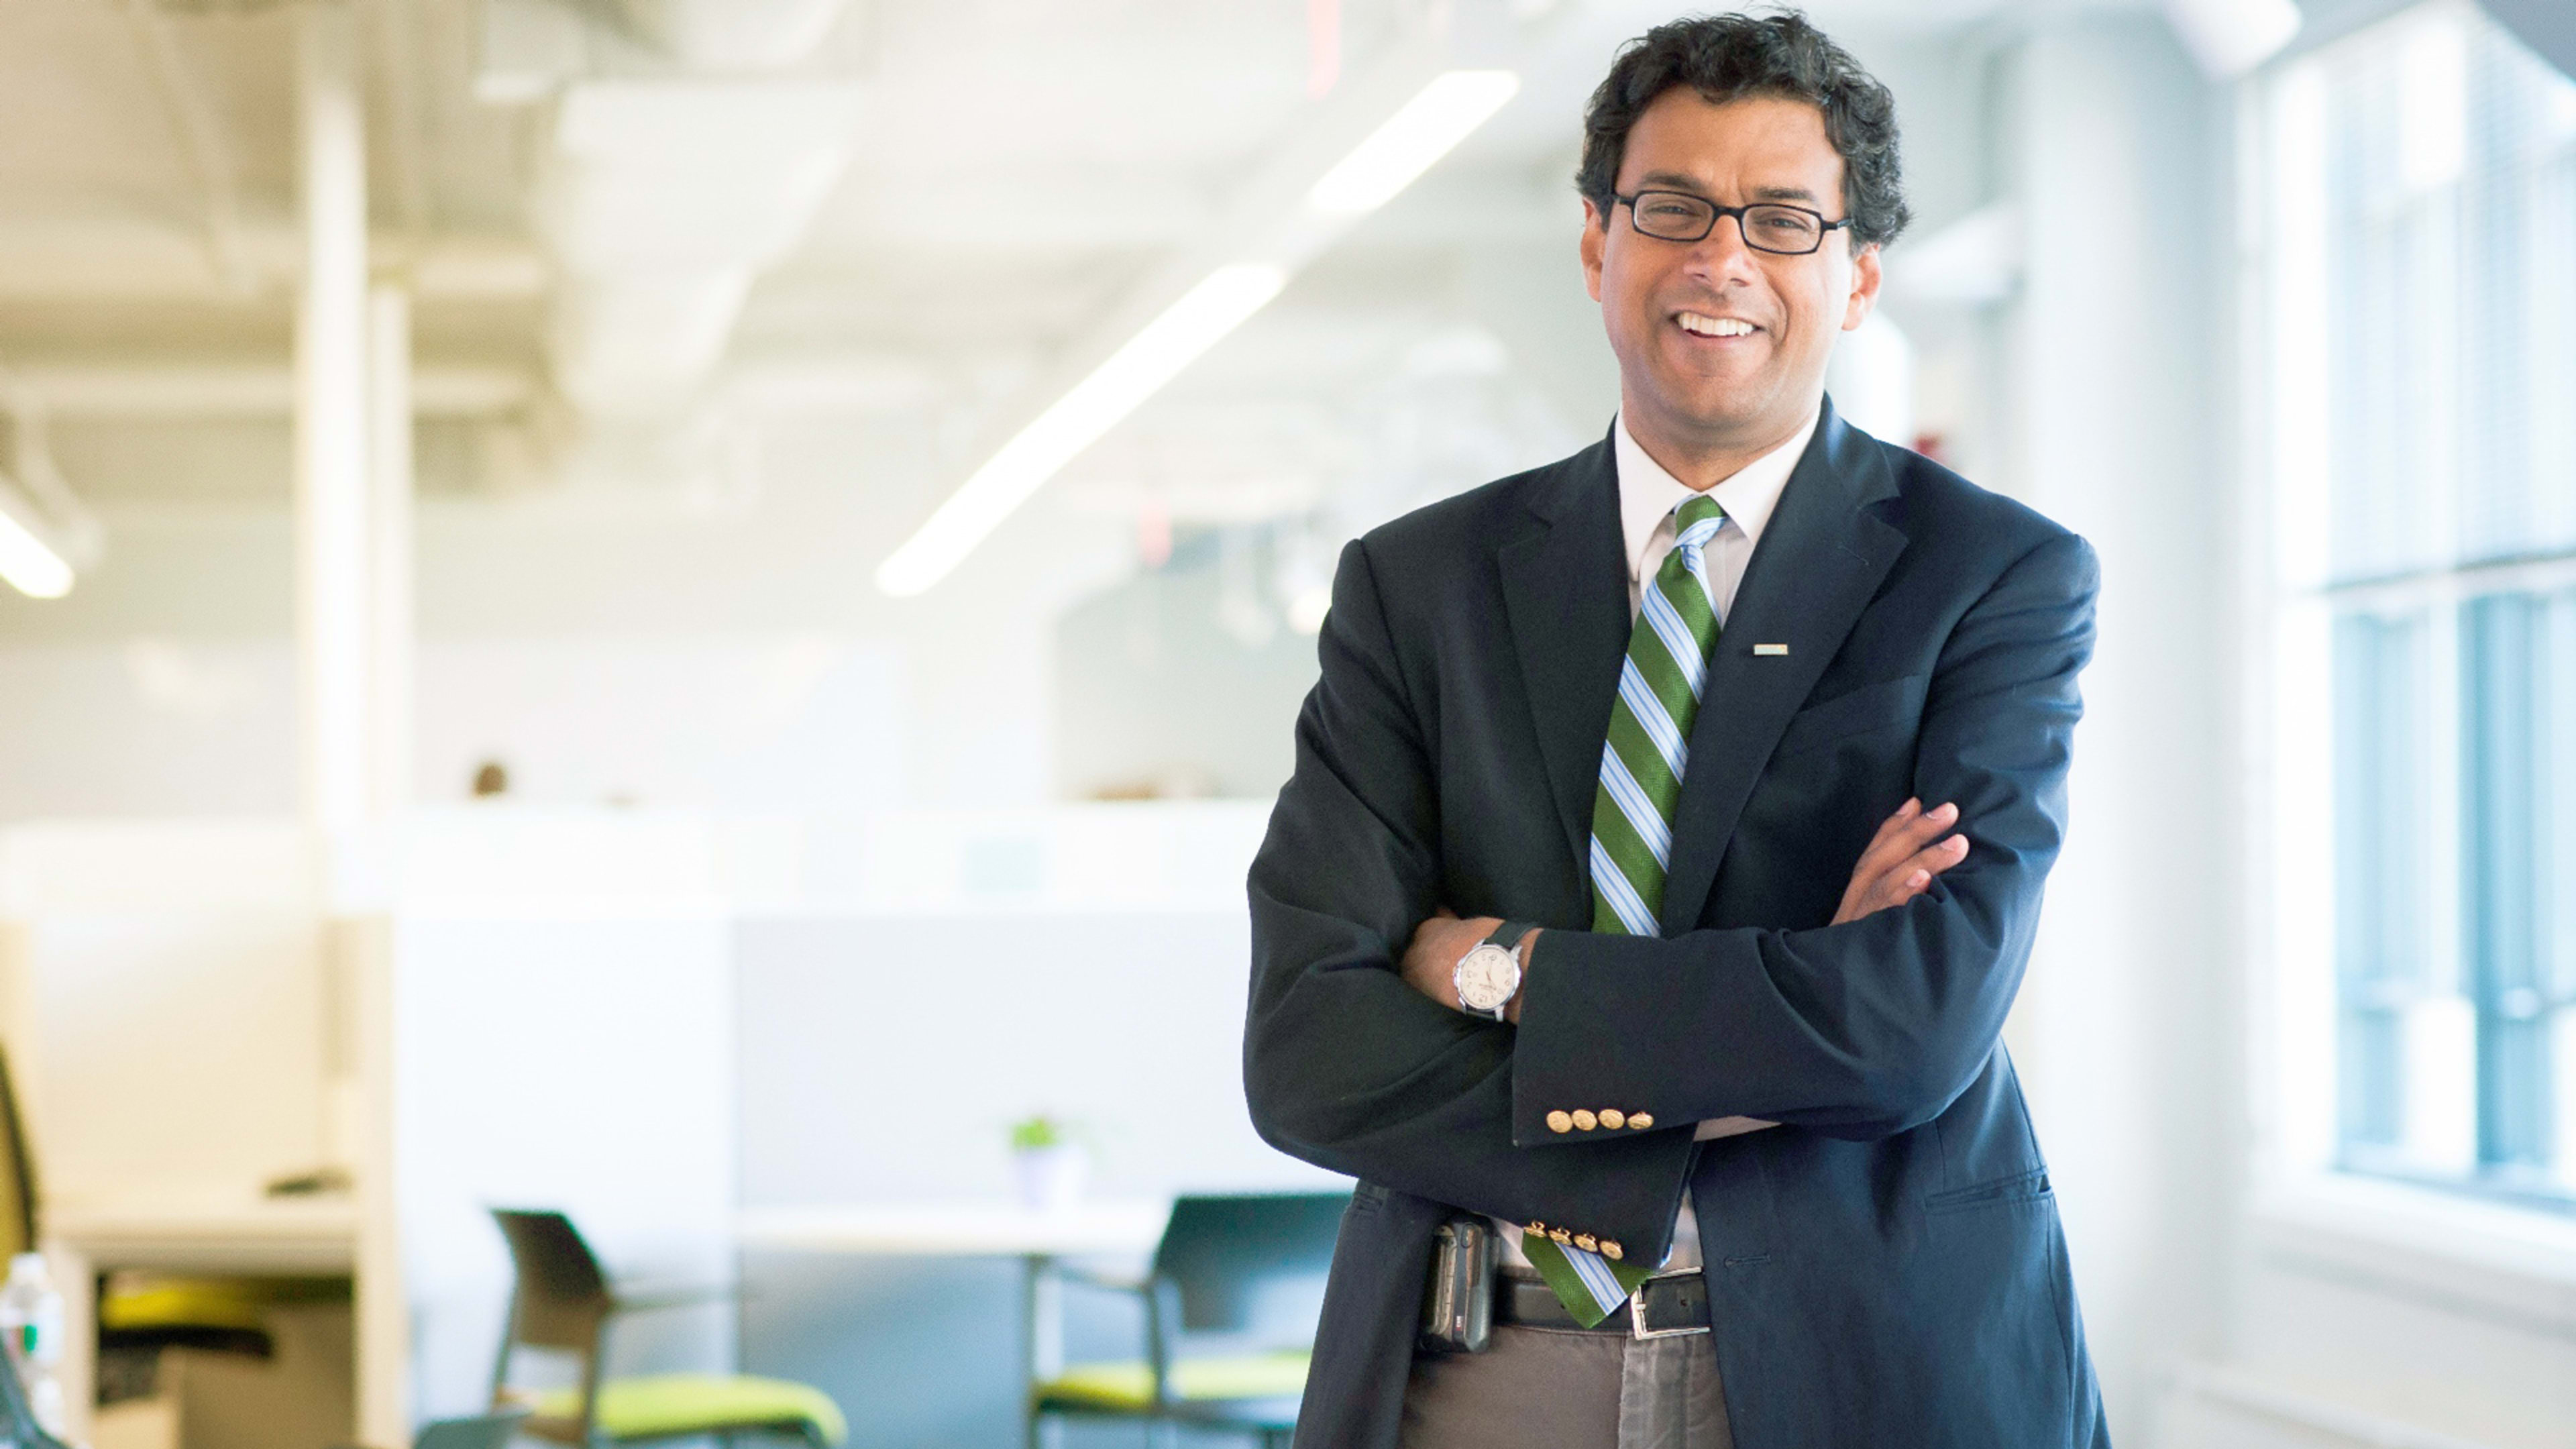 Atul Gawande, New Yorker’s prize-winning writer, tapped to head Amazon-led healthcare company